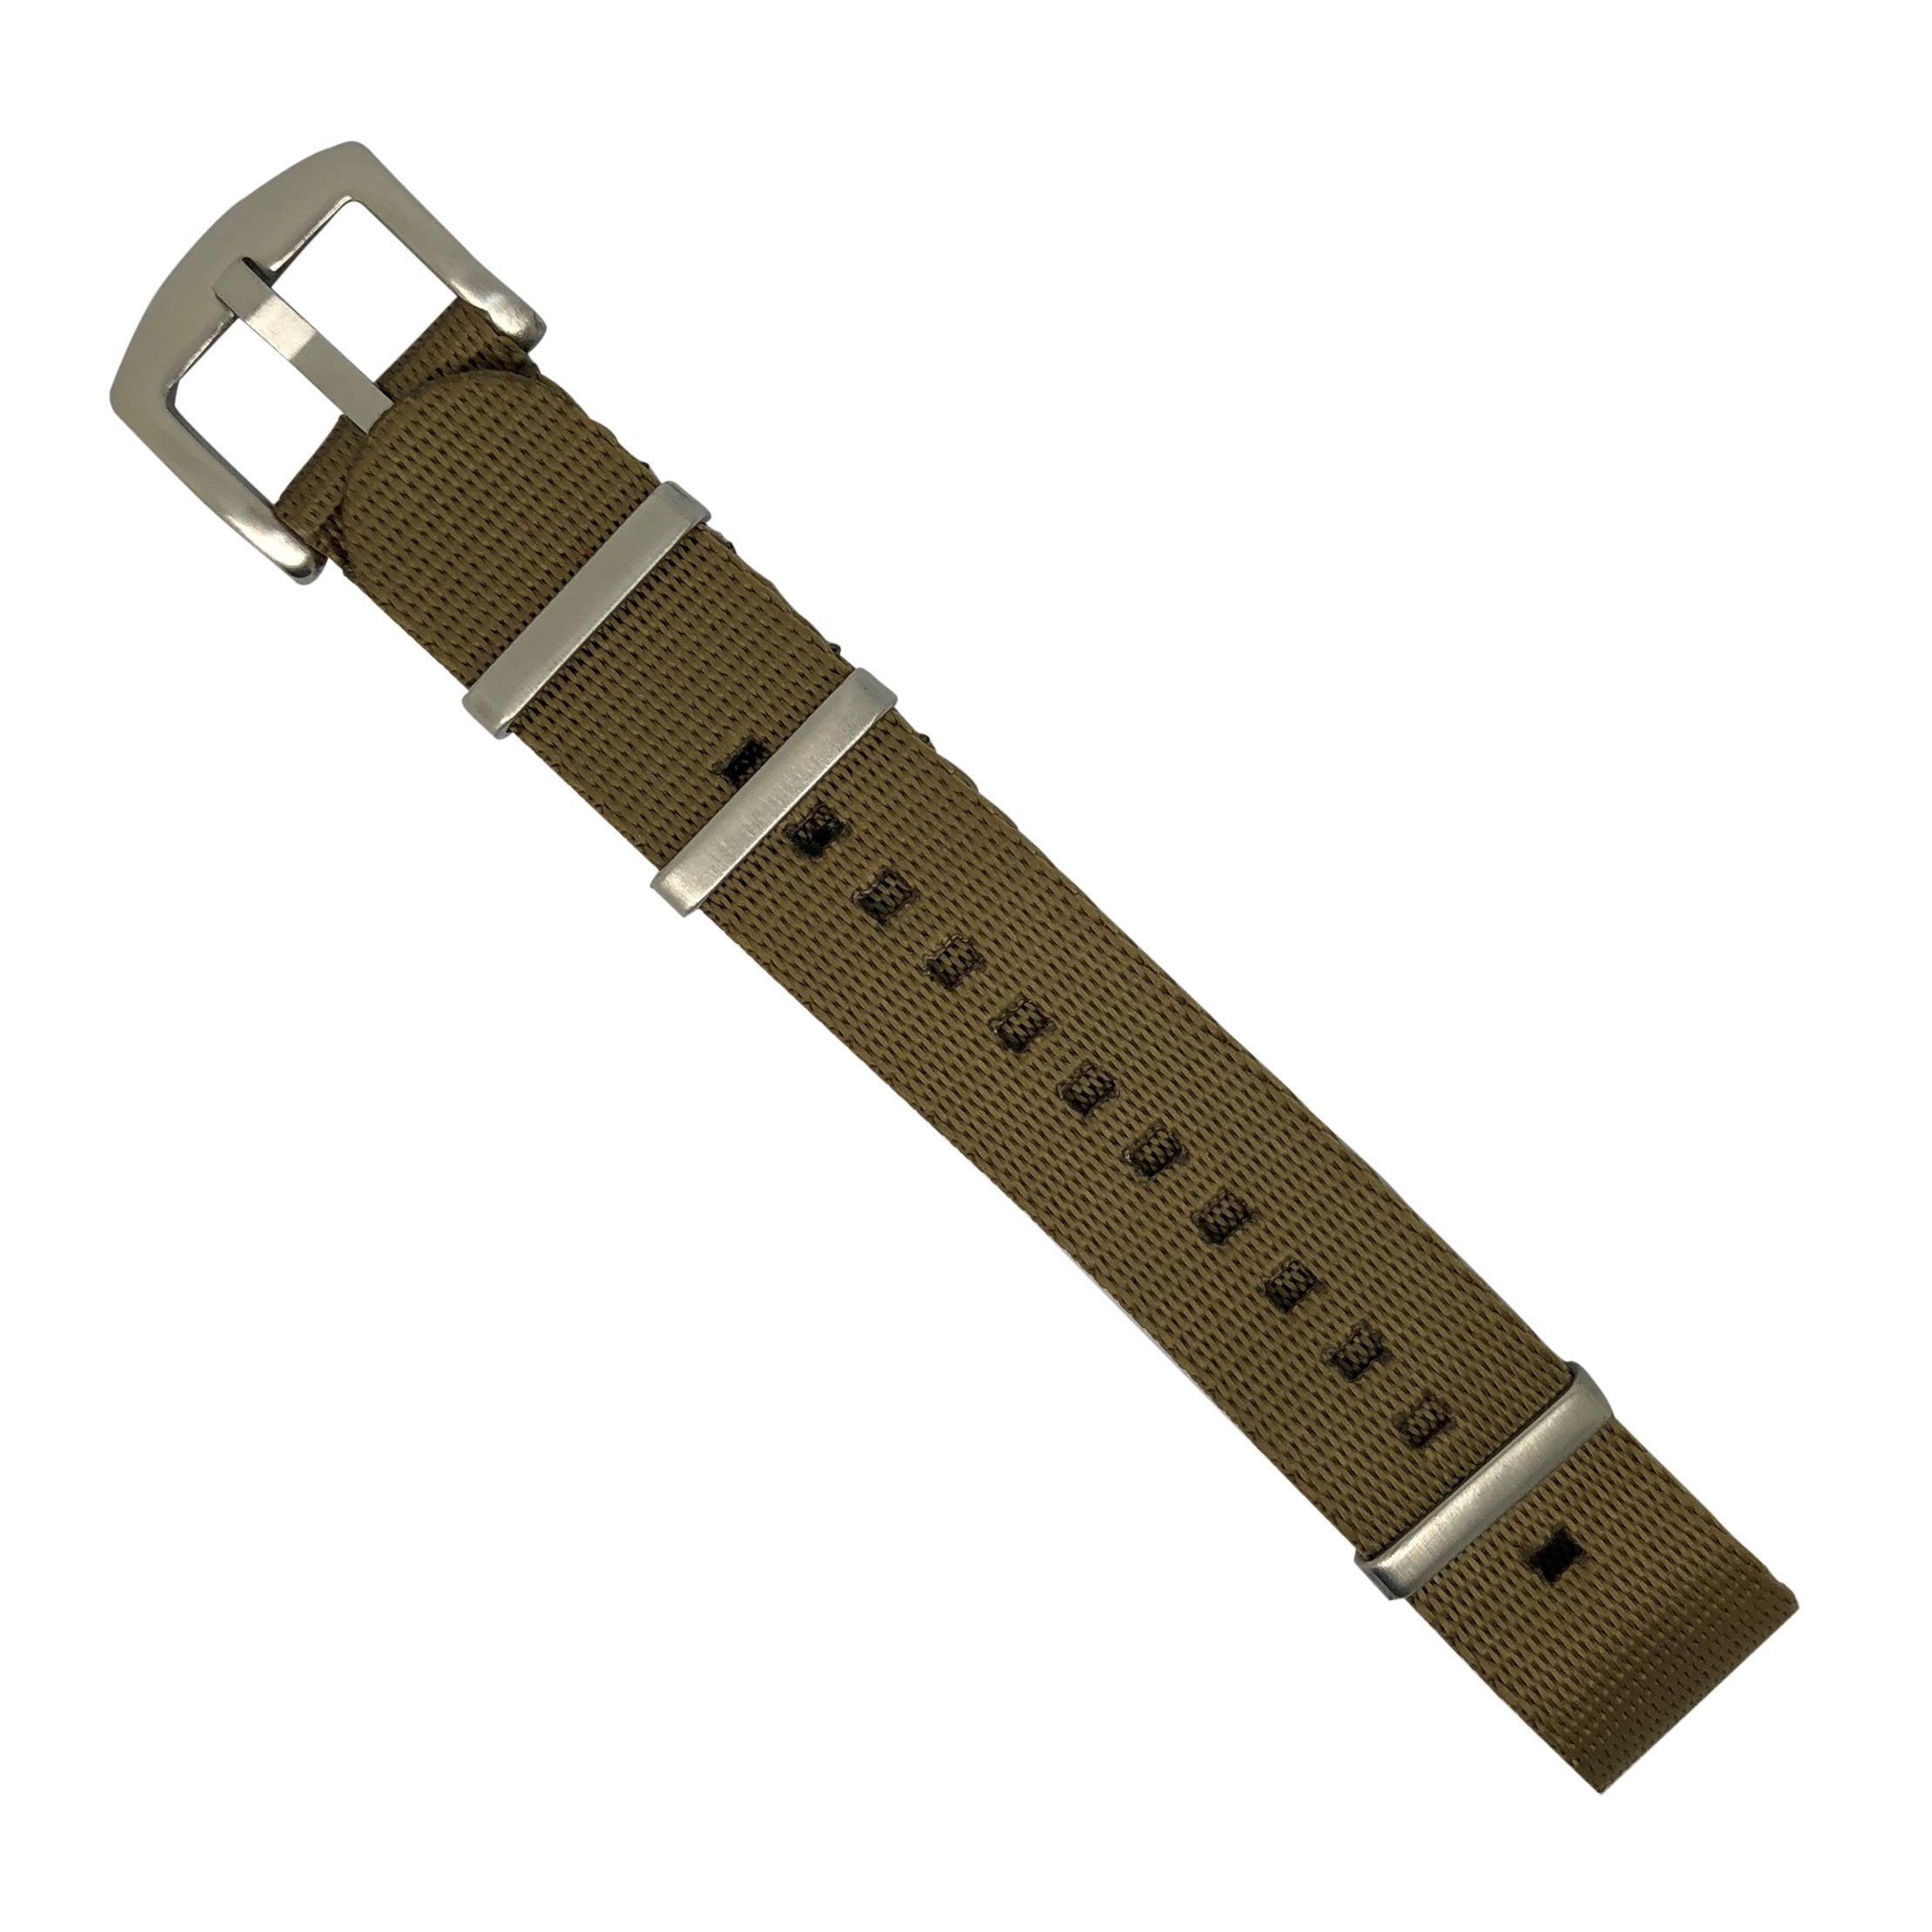 Seat Belt Nato Strap in Khaki with Brushed Silver Buckle (20mm) - Nomad Watch Works Malaysia